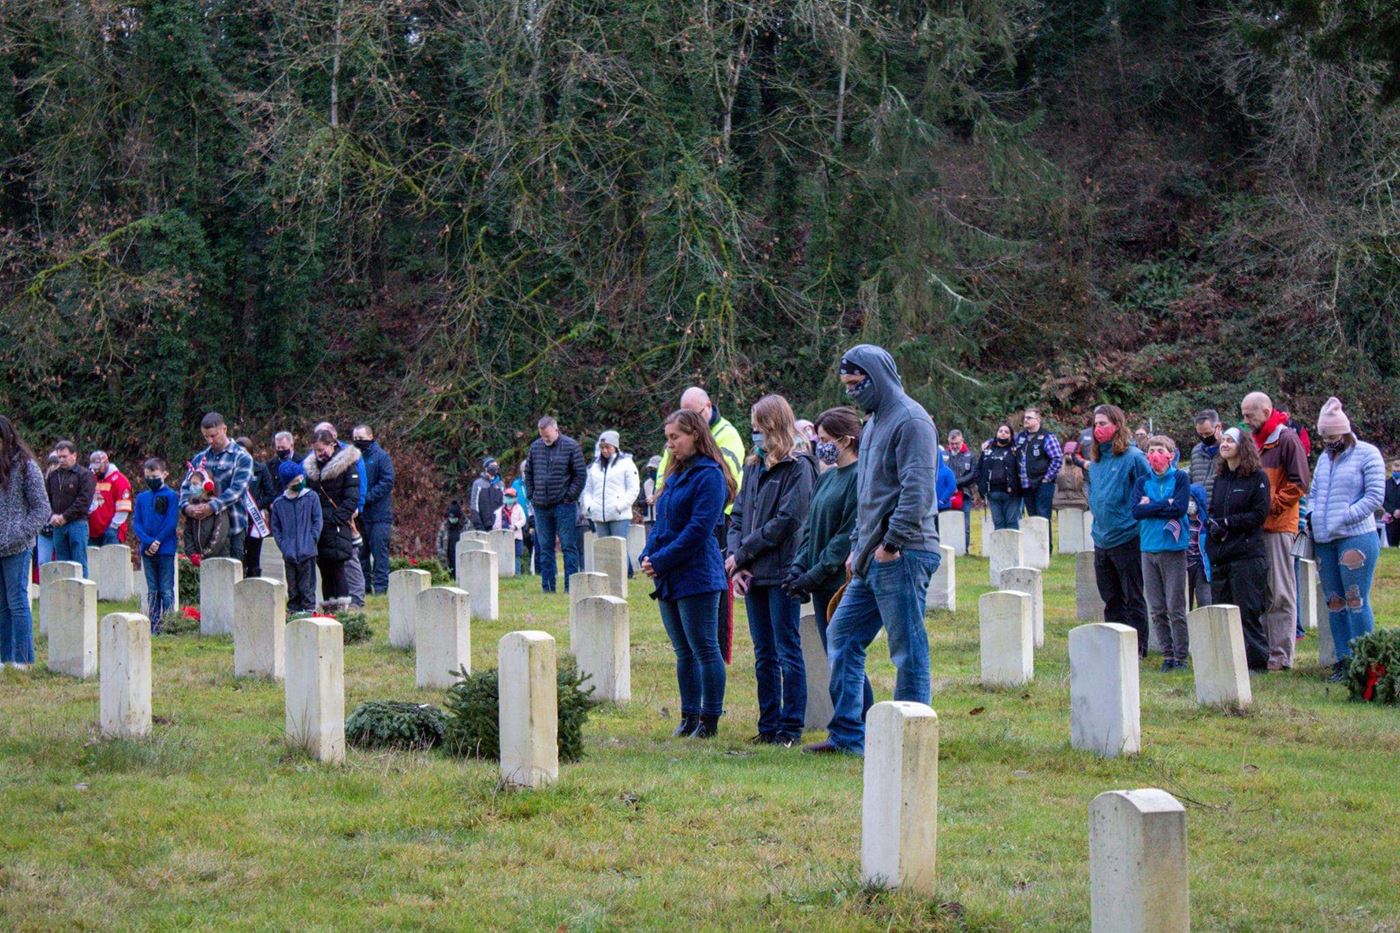 The WAA Orting 2020 Ceremony Attendees in Prayer During Presentation of Ceremonial Service Wreaths